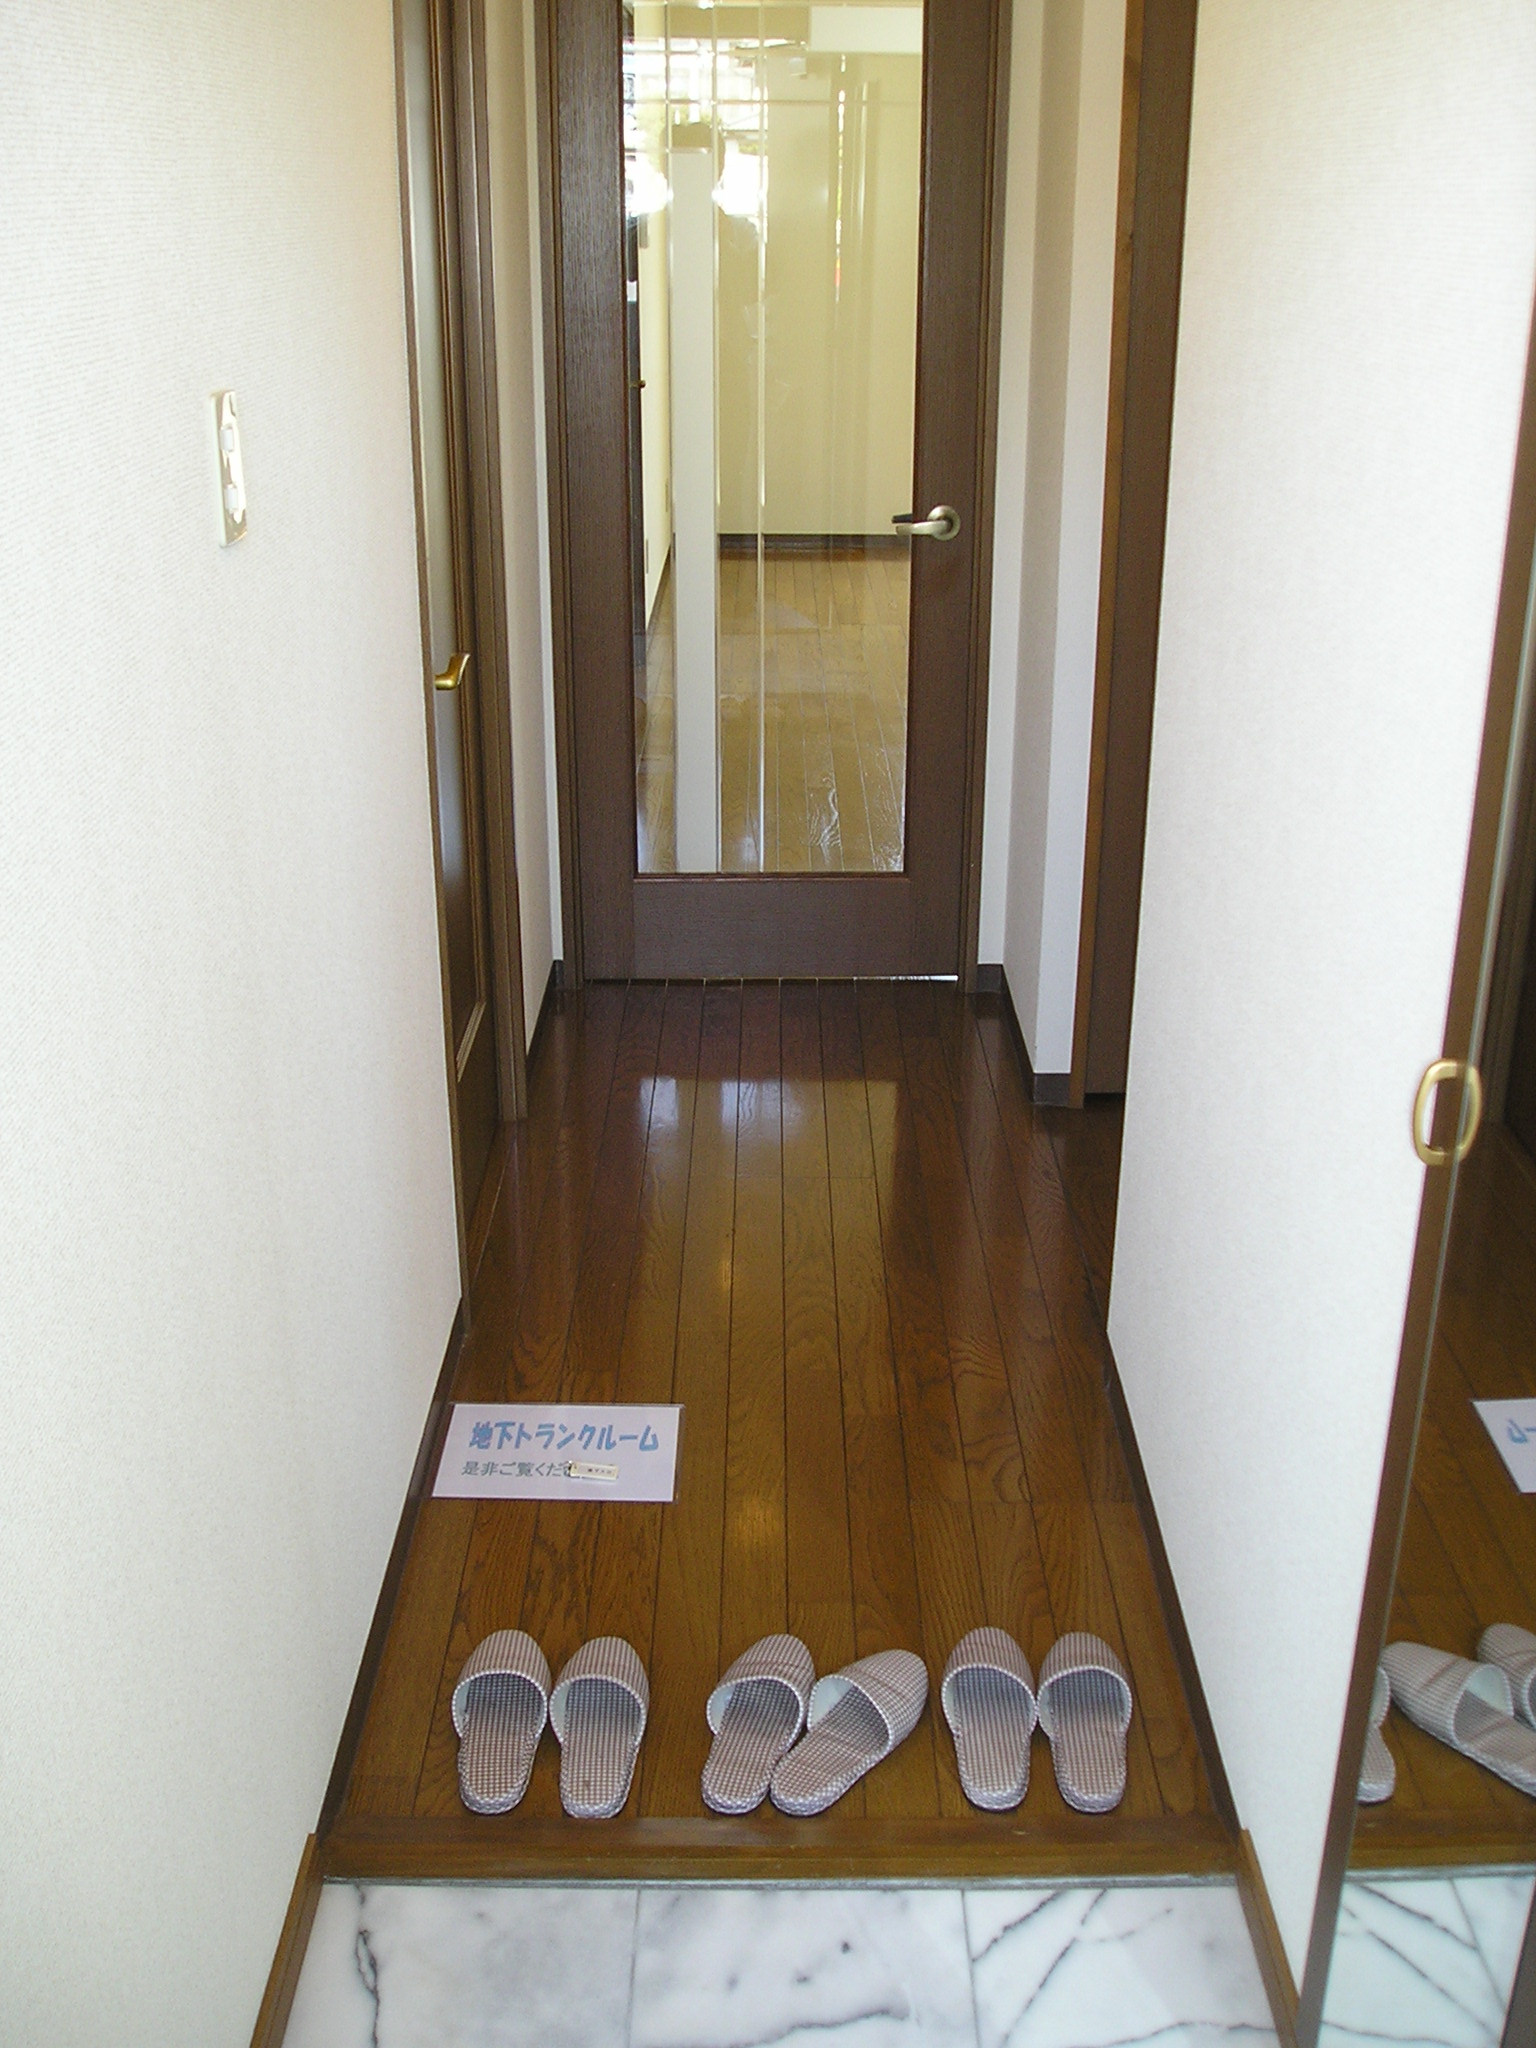 Entrance. It is a mirror with a shoebox